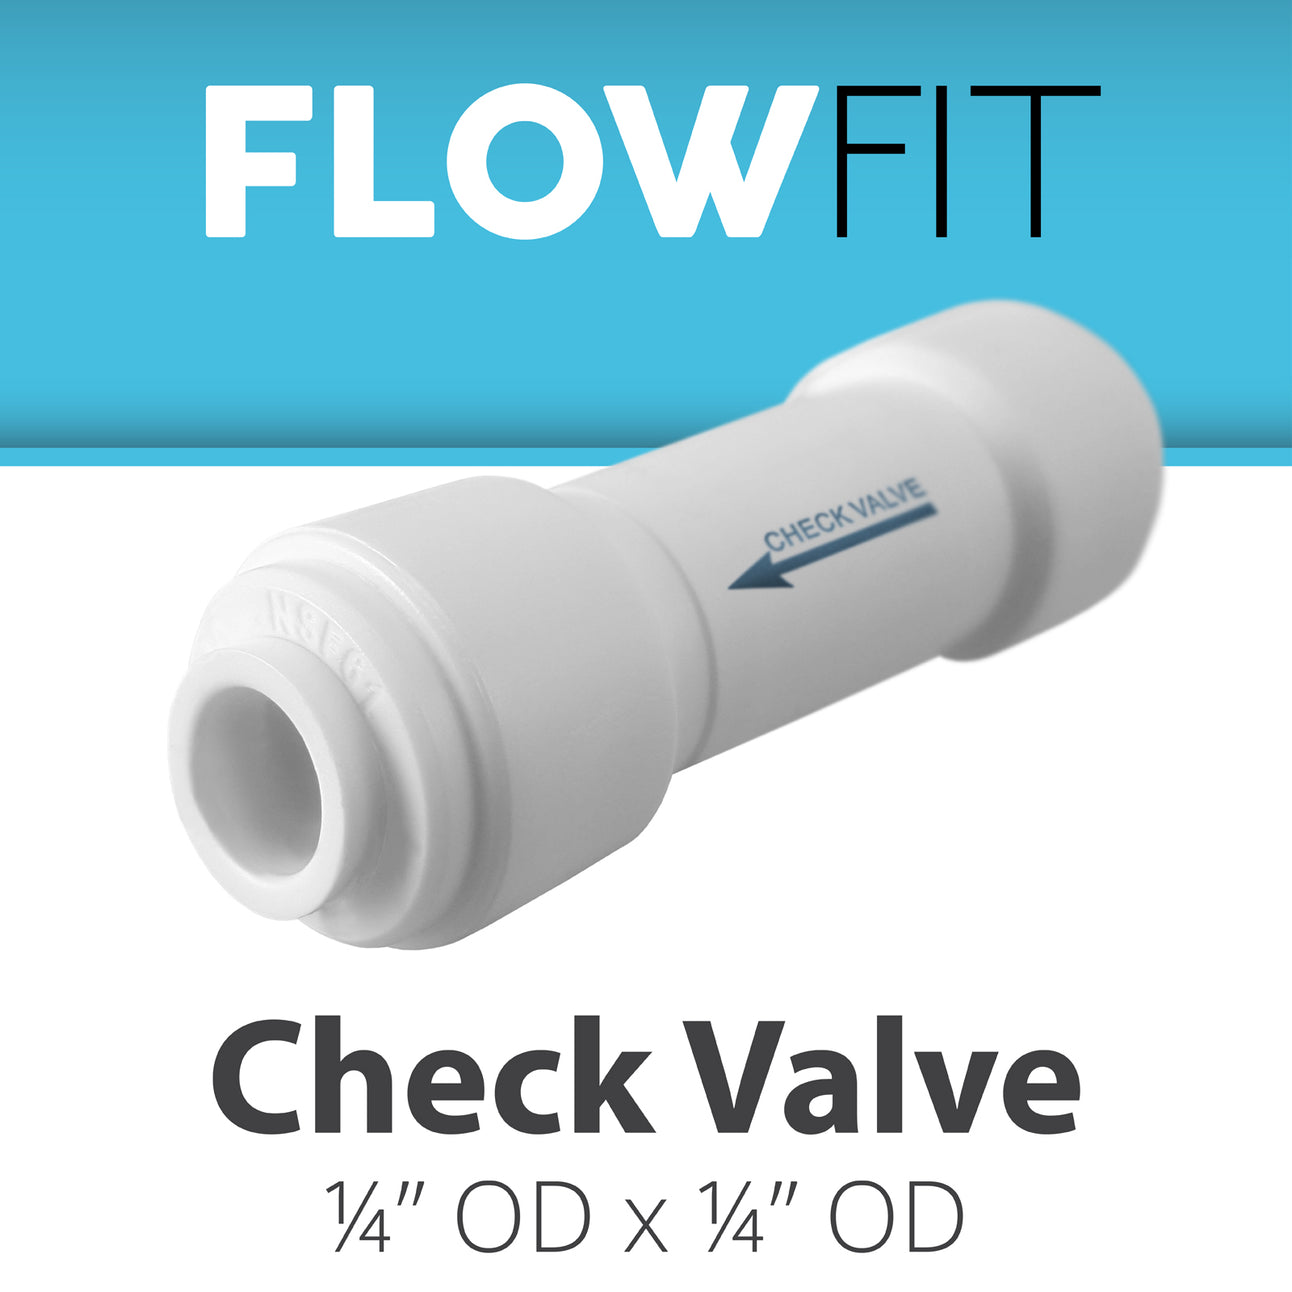 Straight Check Valve 1/4" Fitting Connection Parts for Water Filters/Reverse Osmosis RO Systems - dev-express-water